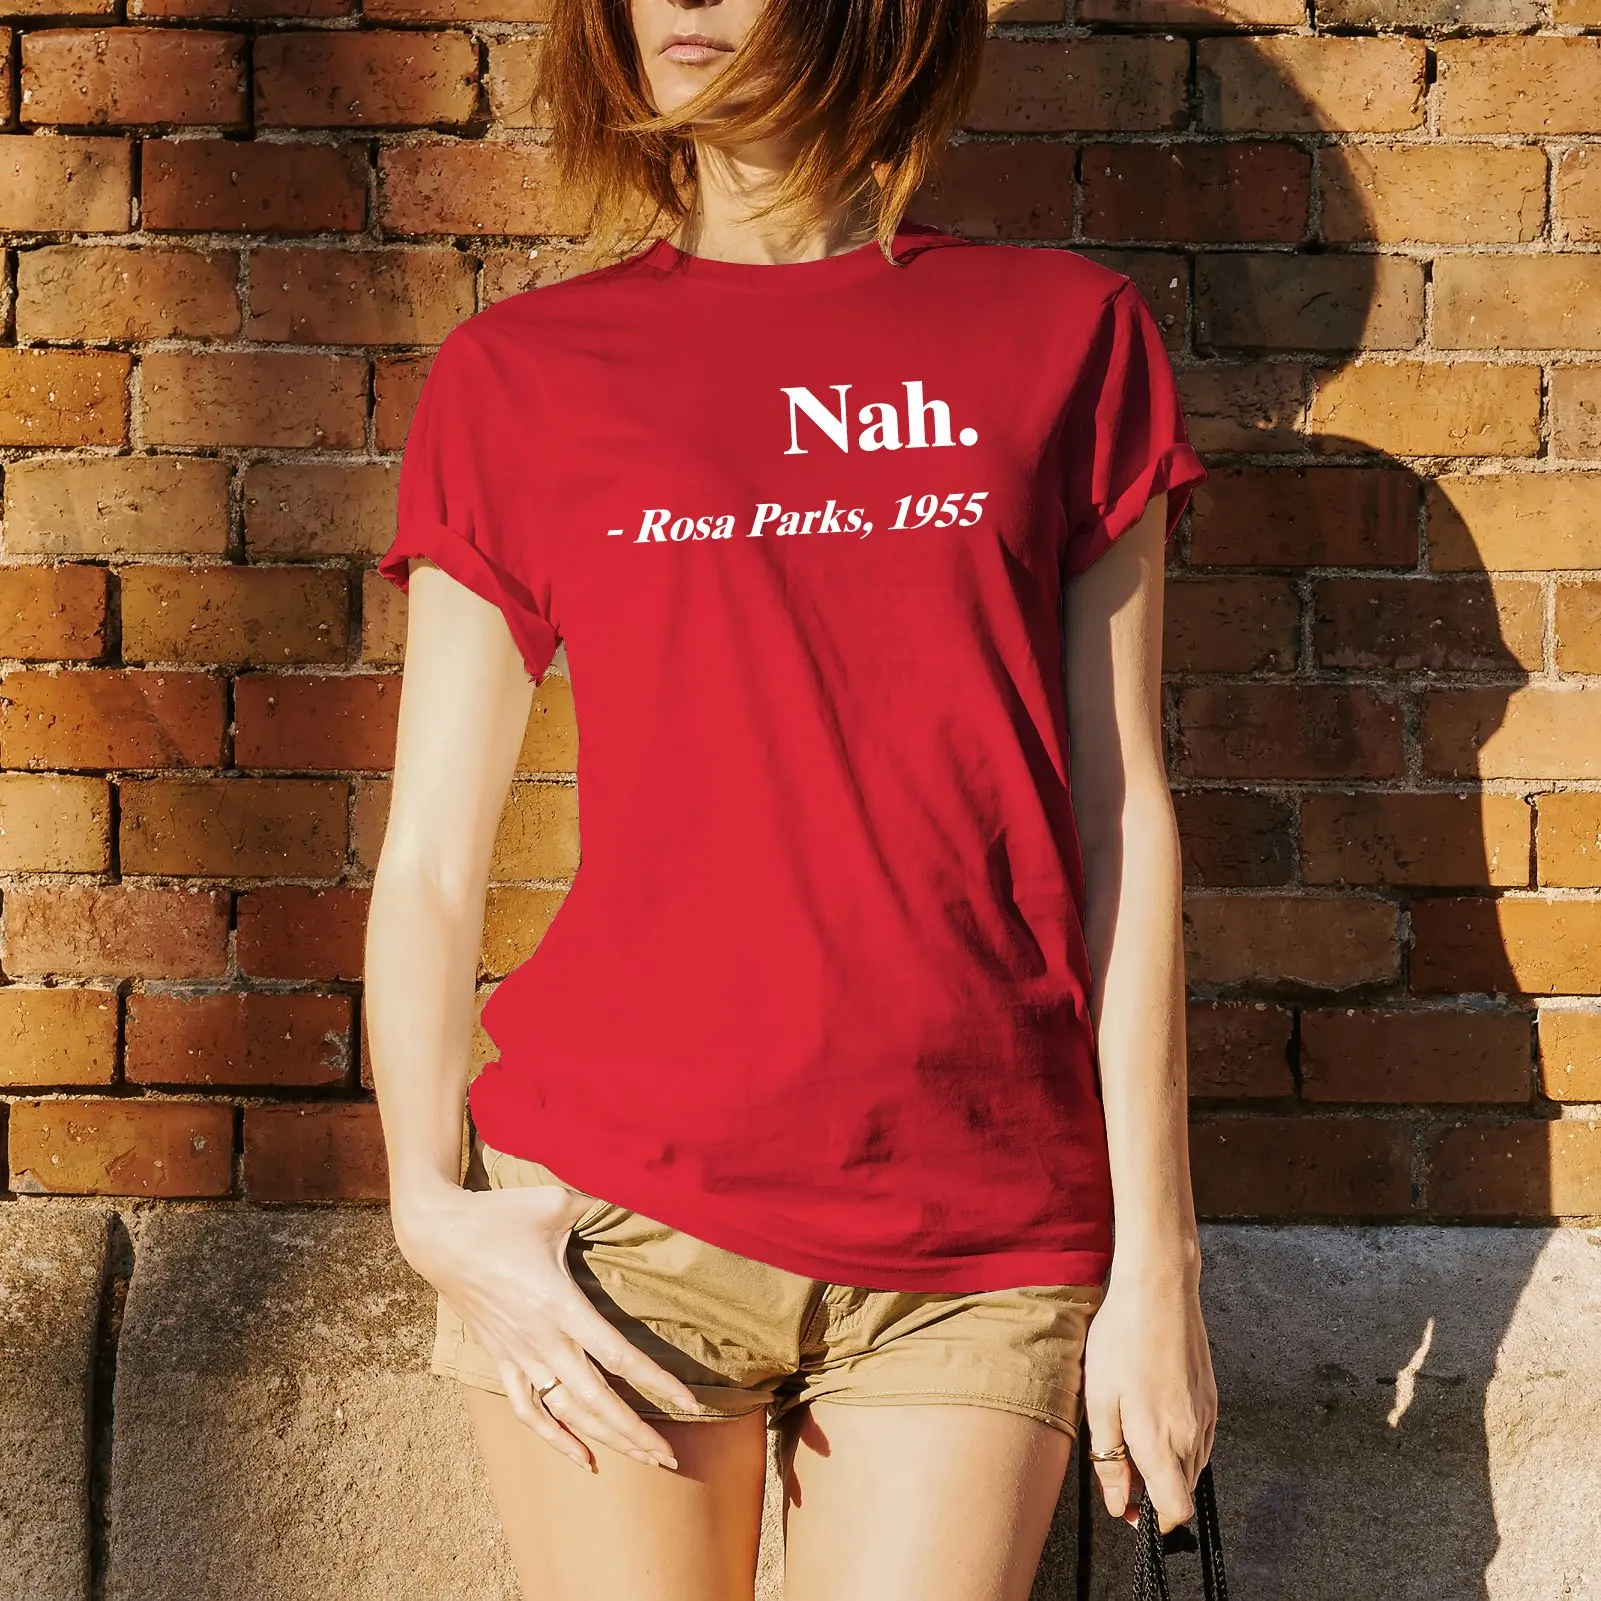 

Nah Rosa Parks 1955 Quotes Funny T Shirt Women Black Lives Matter Equal Rights Tee Summer Red Tops Cotton Civil Rights Tshirt